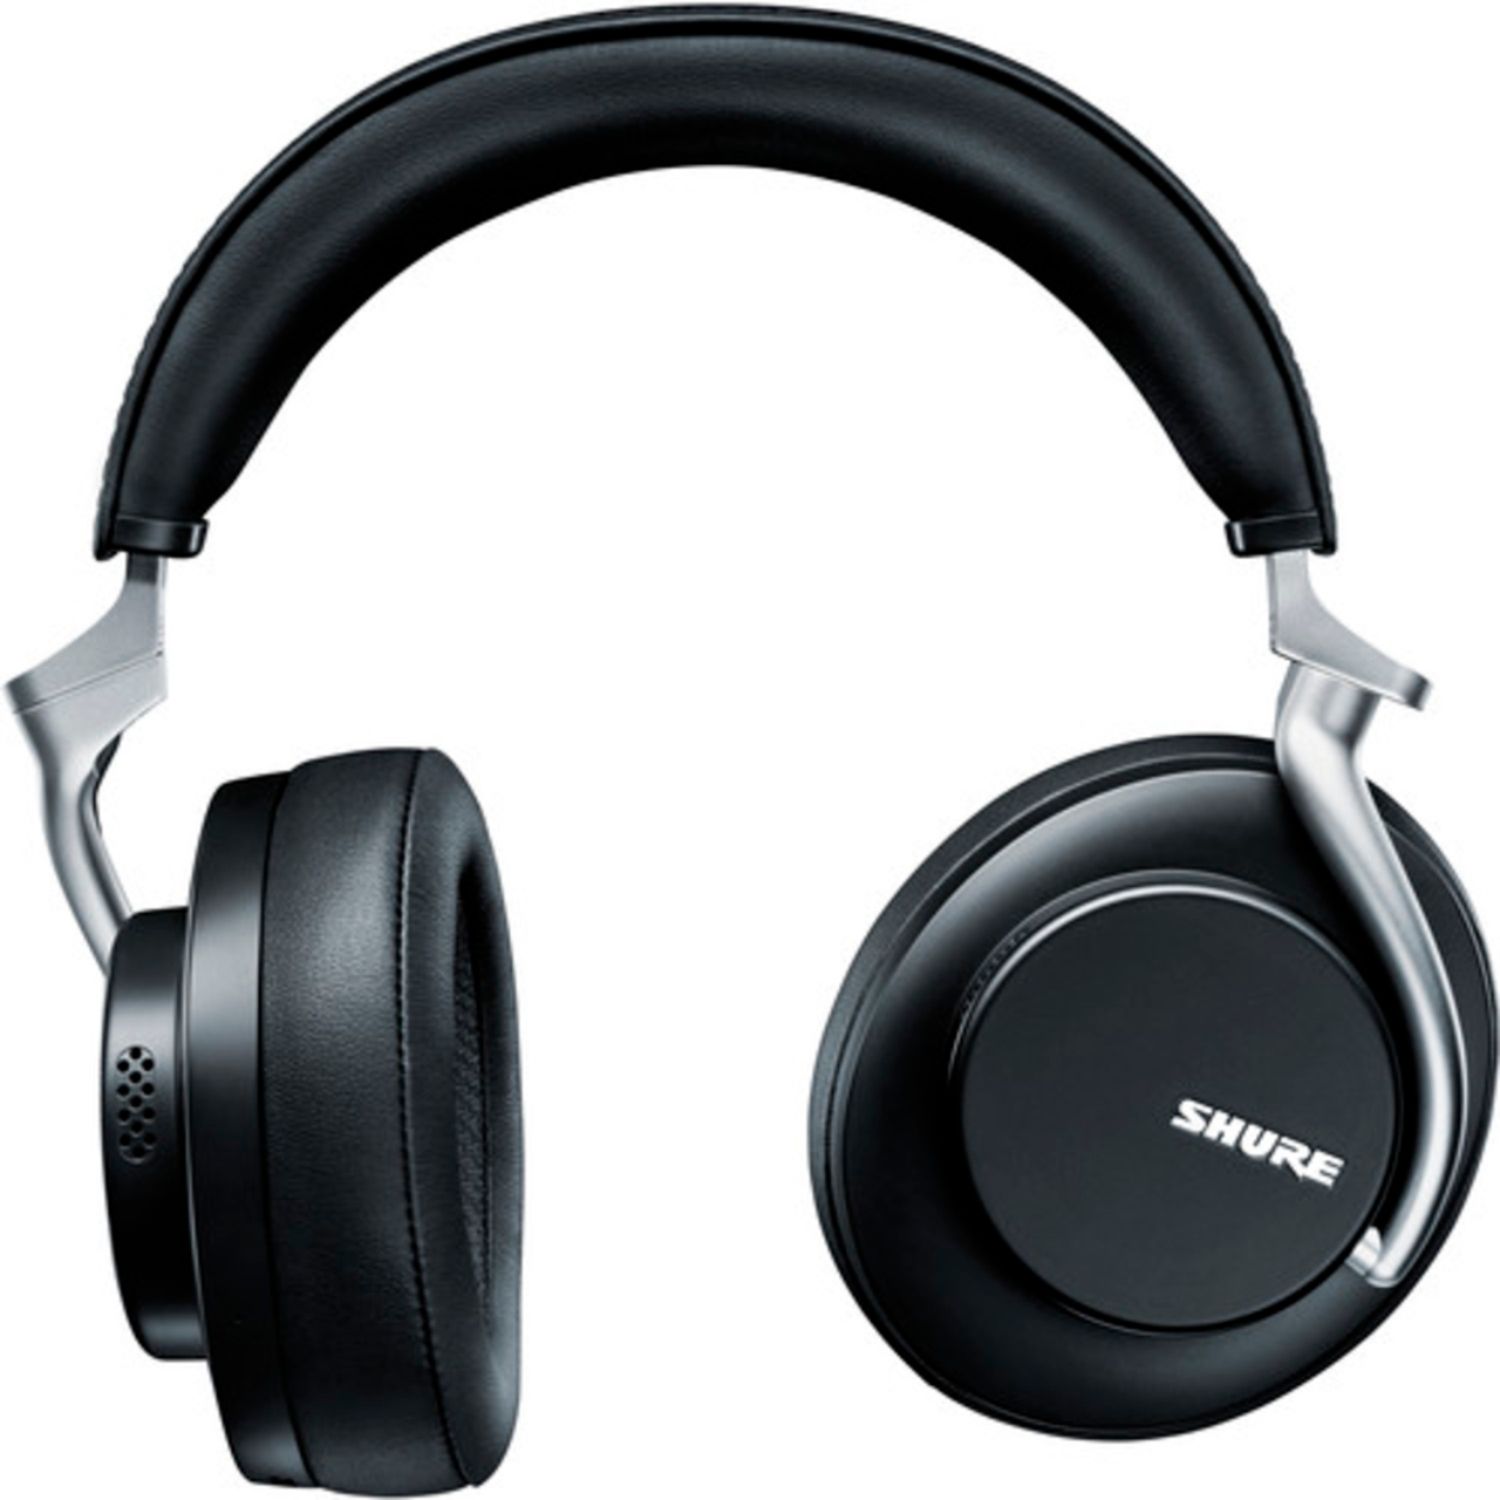 Angle View: Shure - AONIC 50 Wireless Noise Canceling Headphones - Black